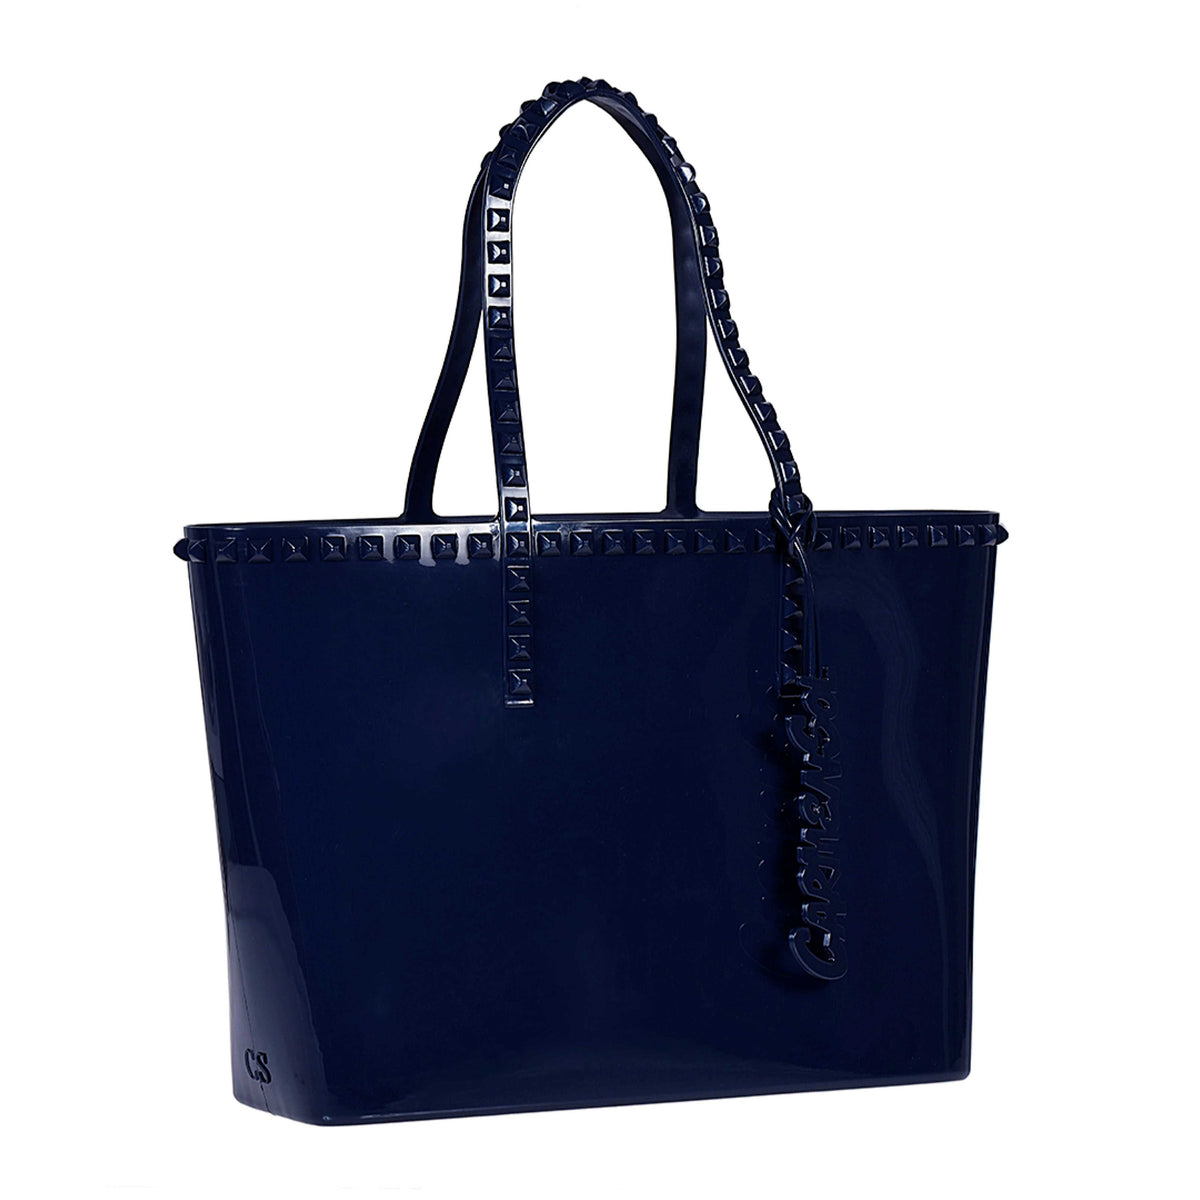 Recyclable beach bags for women in color navy blue